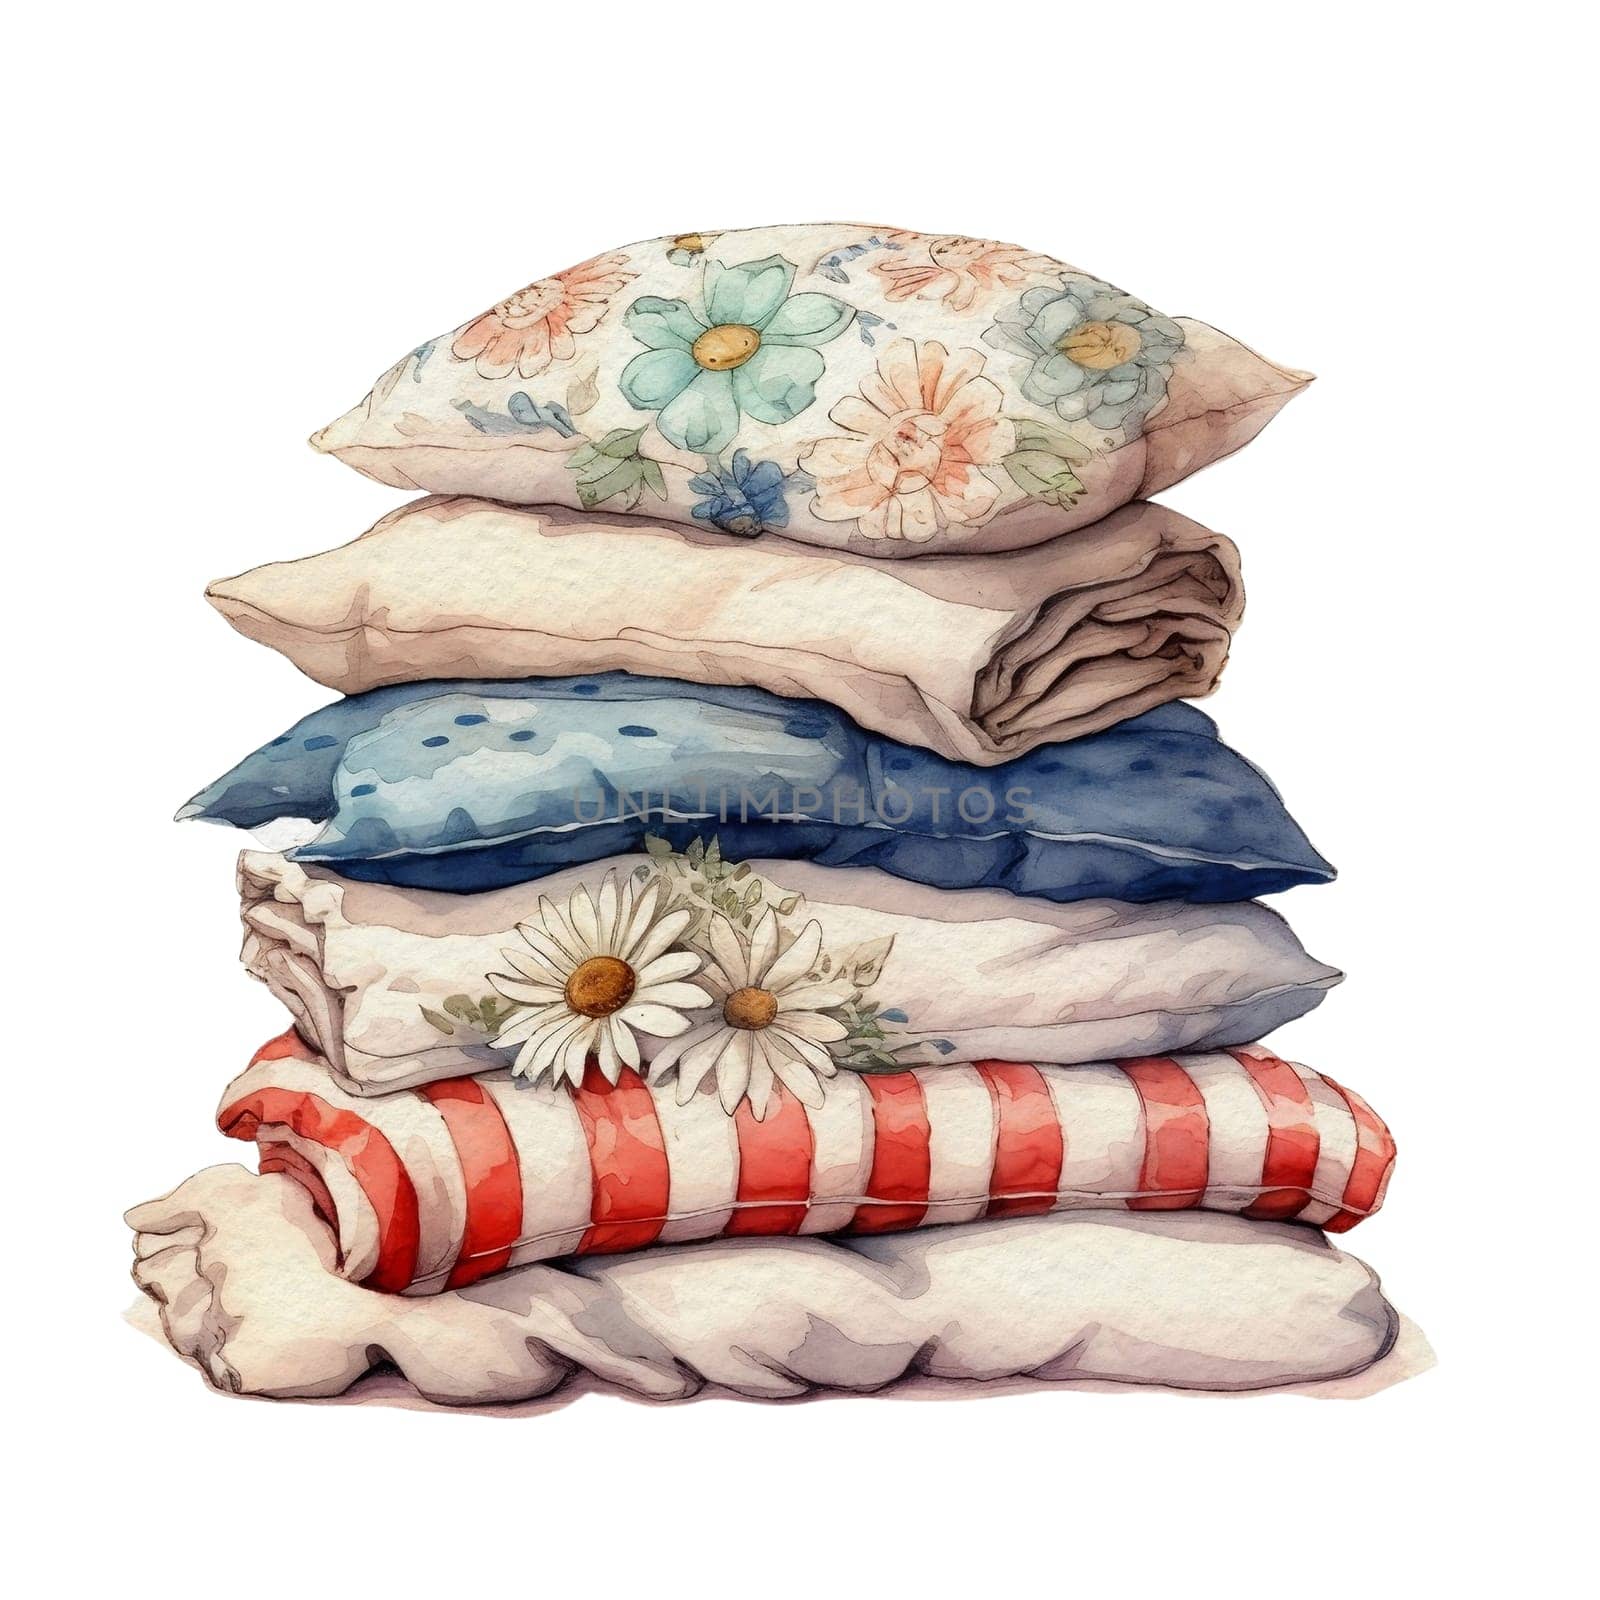 Cozy farmhouse decoration with a pile of pillows and blankets Illustration Clipart. Isolated fourth of July element on white background for Independence Day sublimation design.